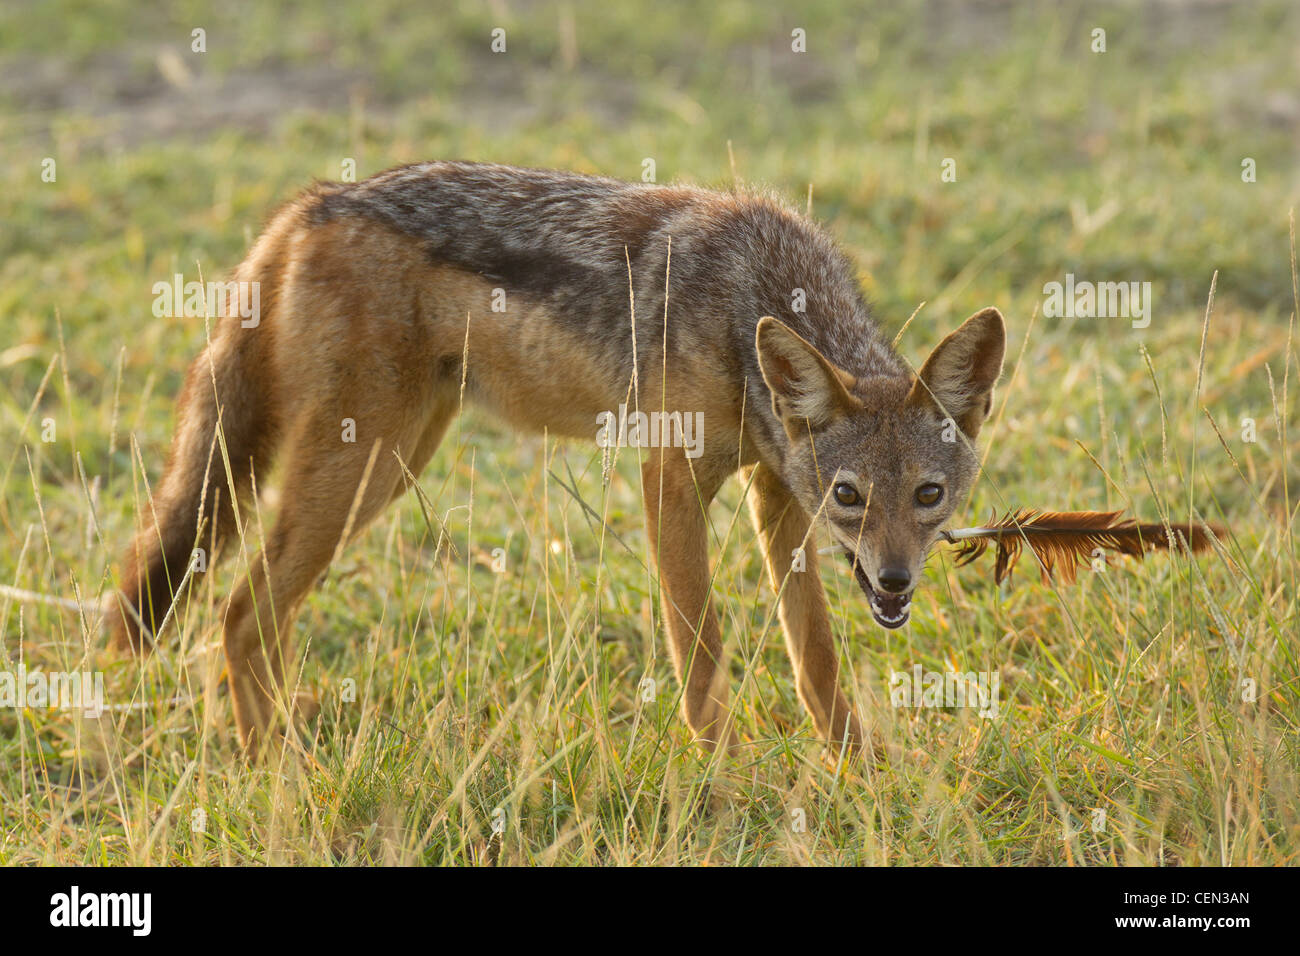 Black Backed Jackal (Canis mesomelas) with feather, in the Serengeti, Tanzania Stock Photo